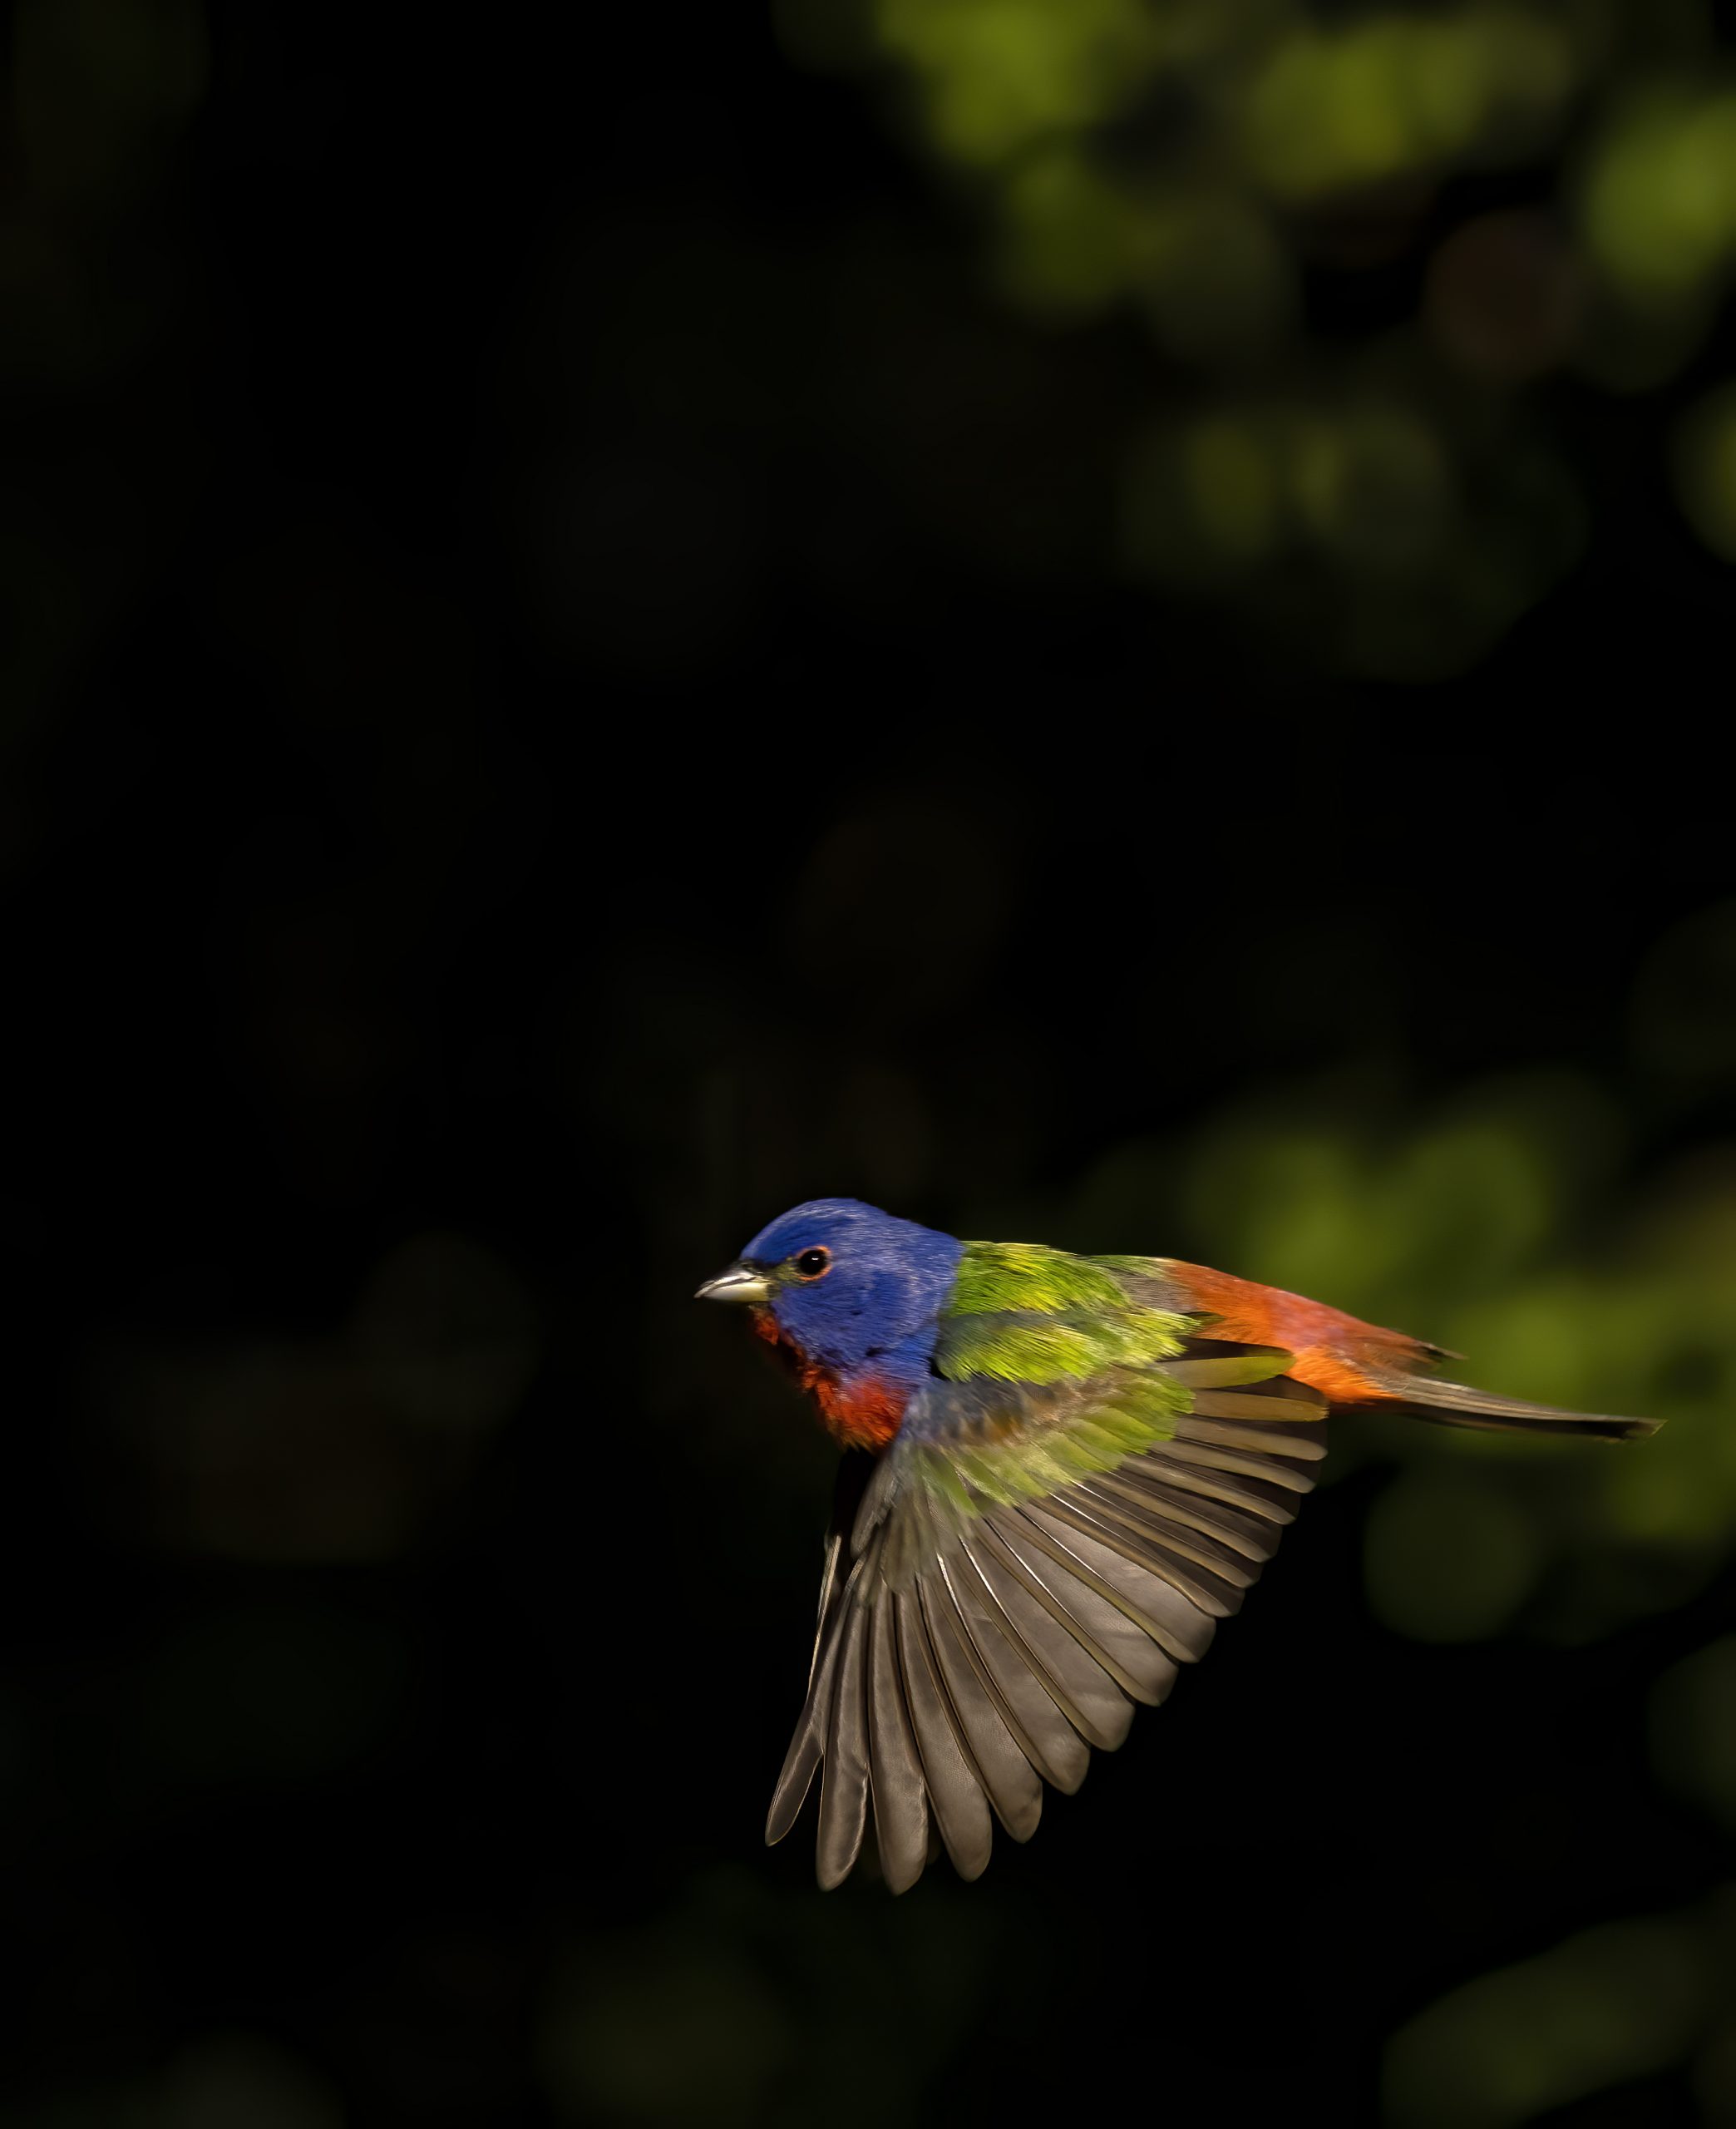 The male painted bunting is said to be in the French language nonpareil, meaning without equal. This bird’s plumage is truly spectacular; we call it a flying paintbrush. The females are a bright yellow-green.